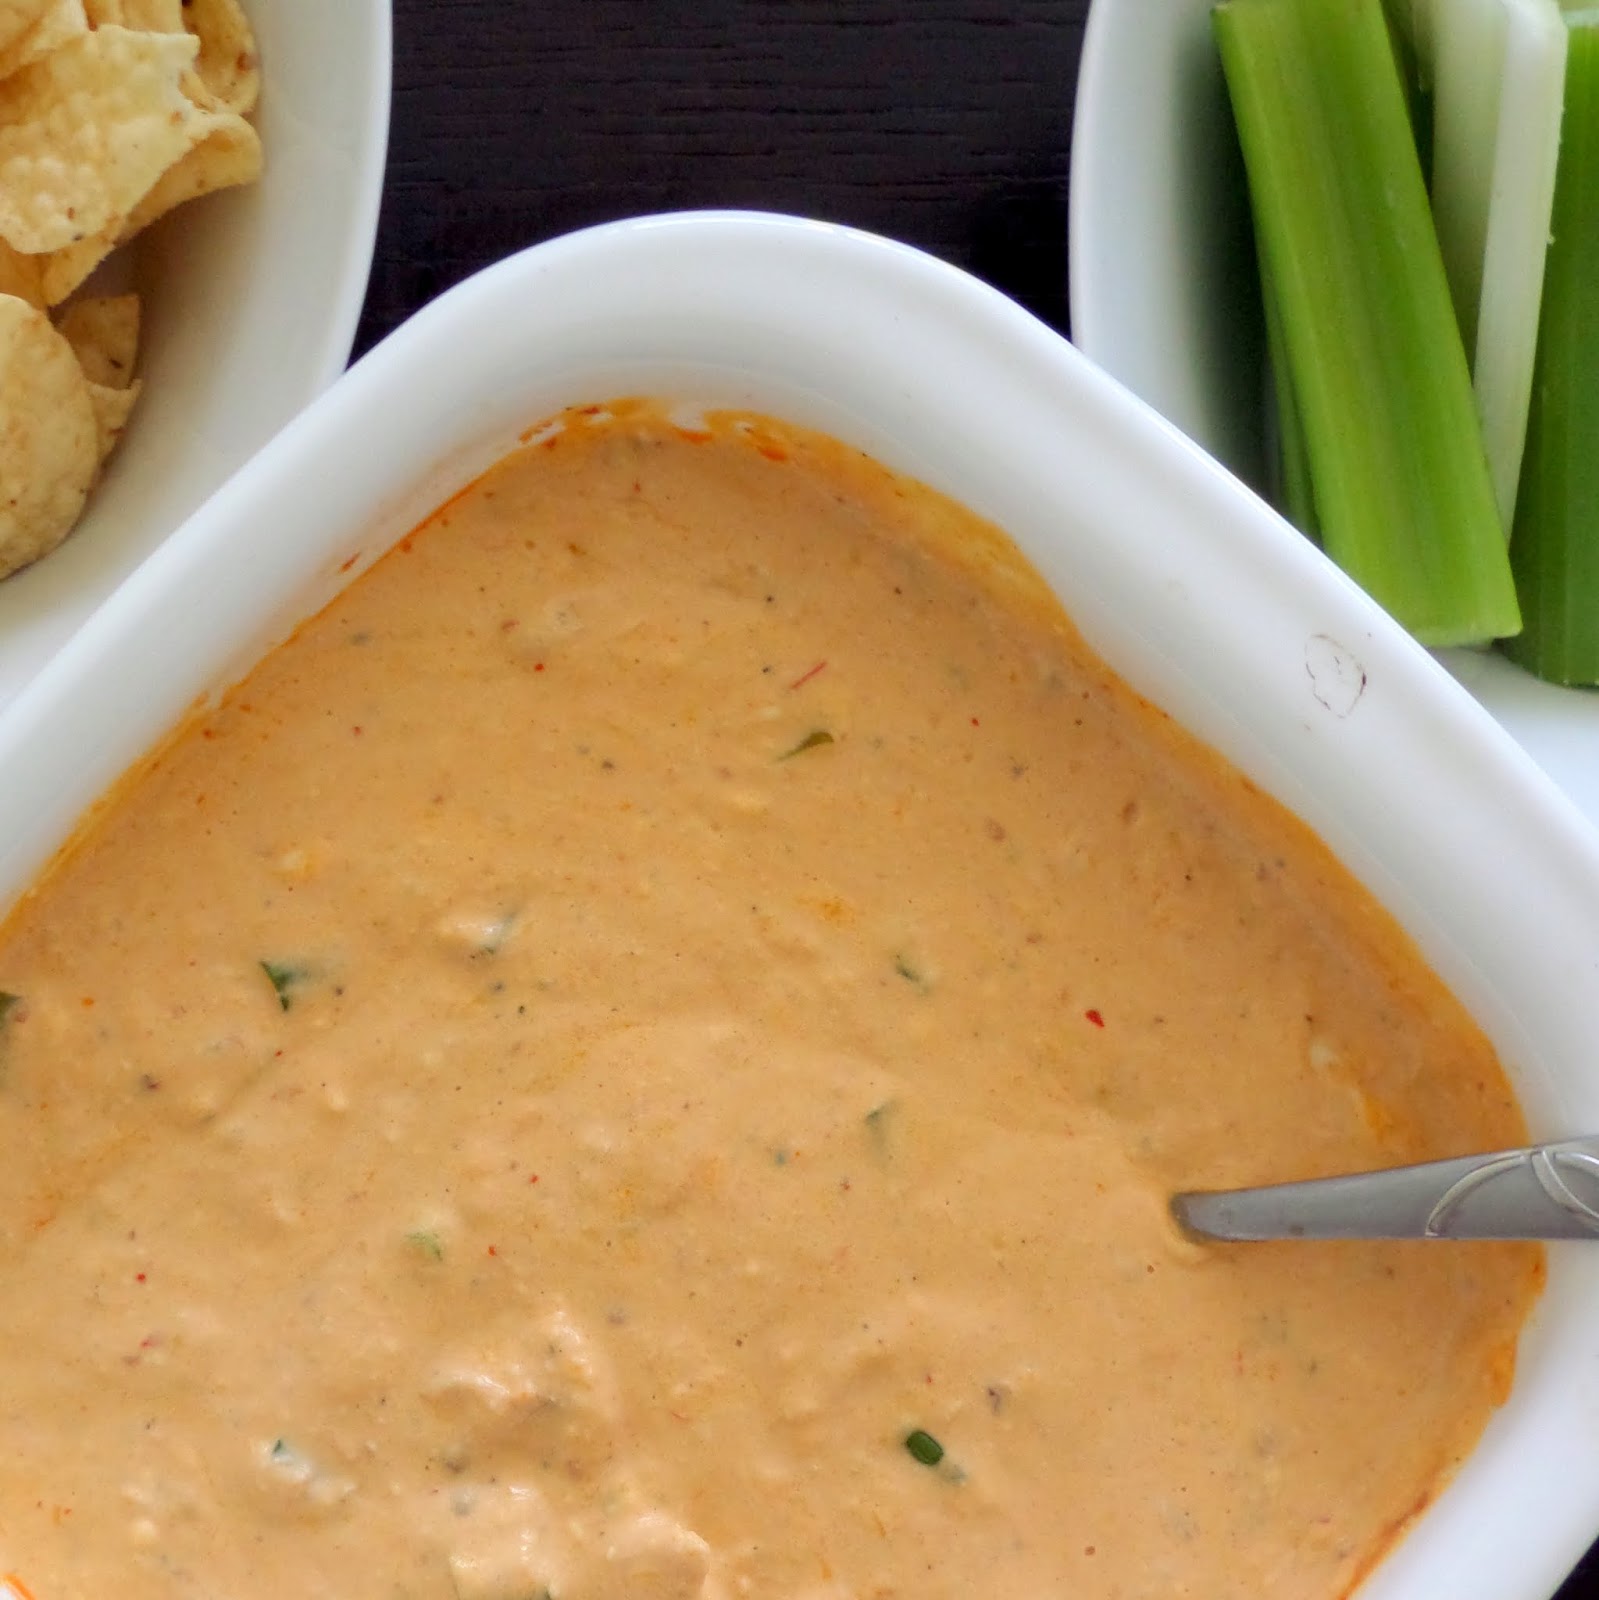 Blue Cheese Buffalo Chicken Dip:  A warm and spicy dip made with cream cheese, sour cream, blue cheese, chicken, and buffalo sauce.